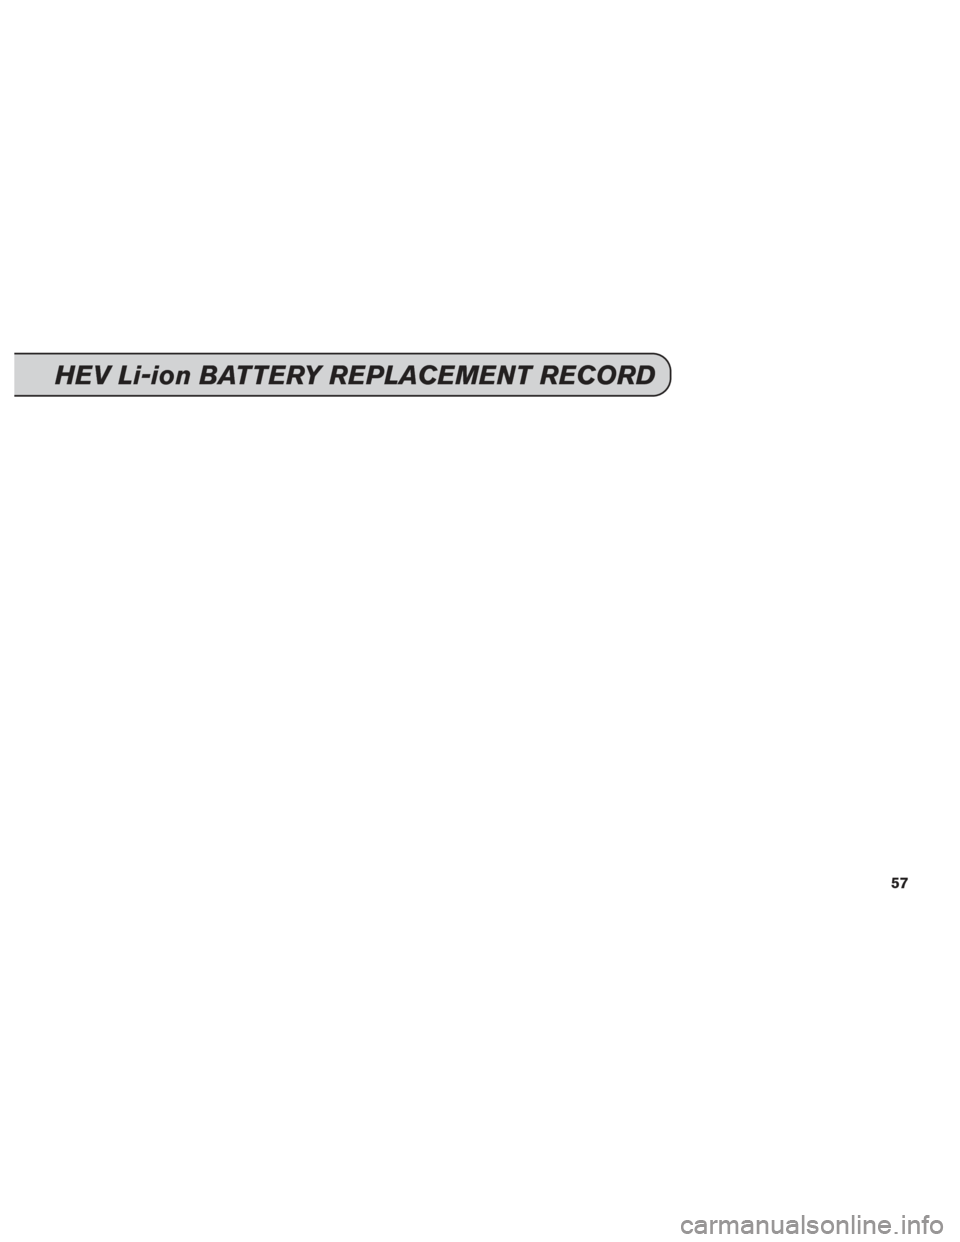 NISSAN PATHFINDER 2014 R52 / 4.G Service And Maintenance Guide HEV Li-ion BATTERY REPLACEMENT RECORD
57 